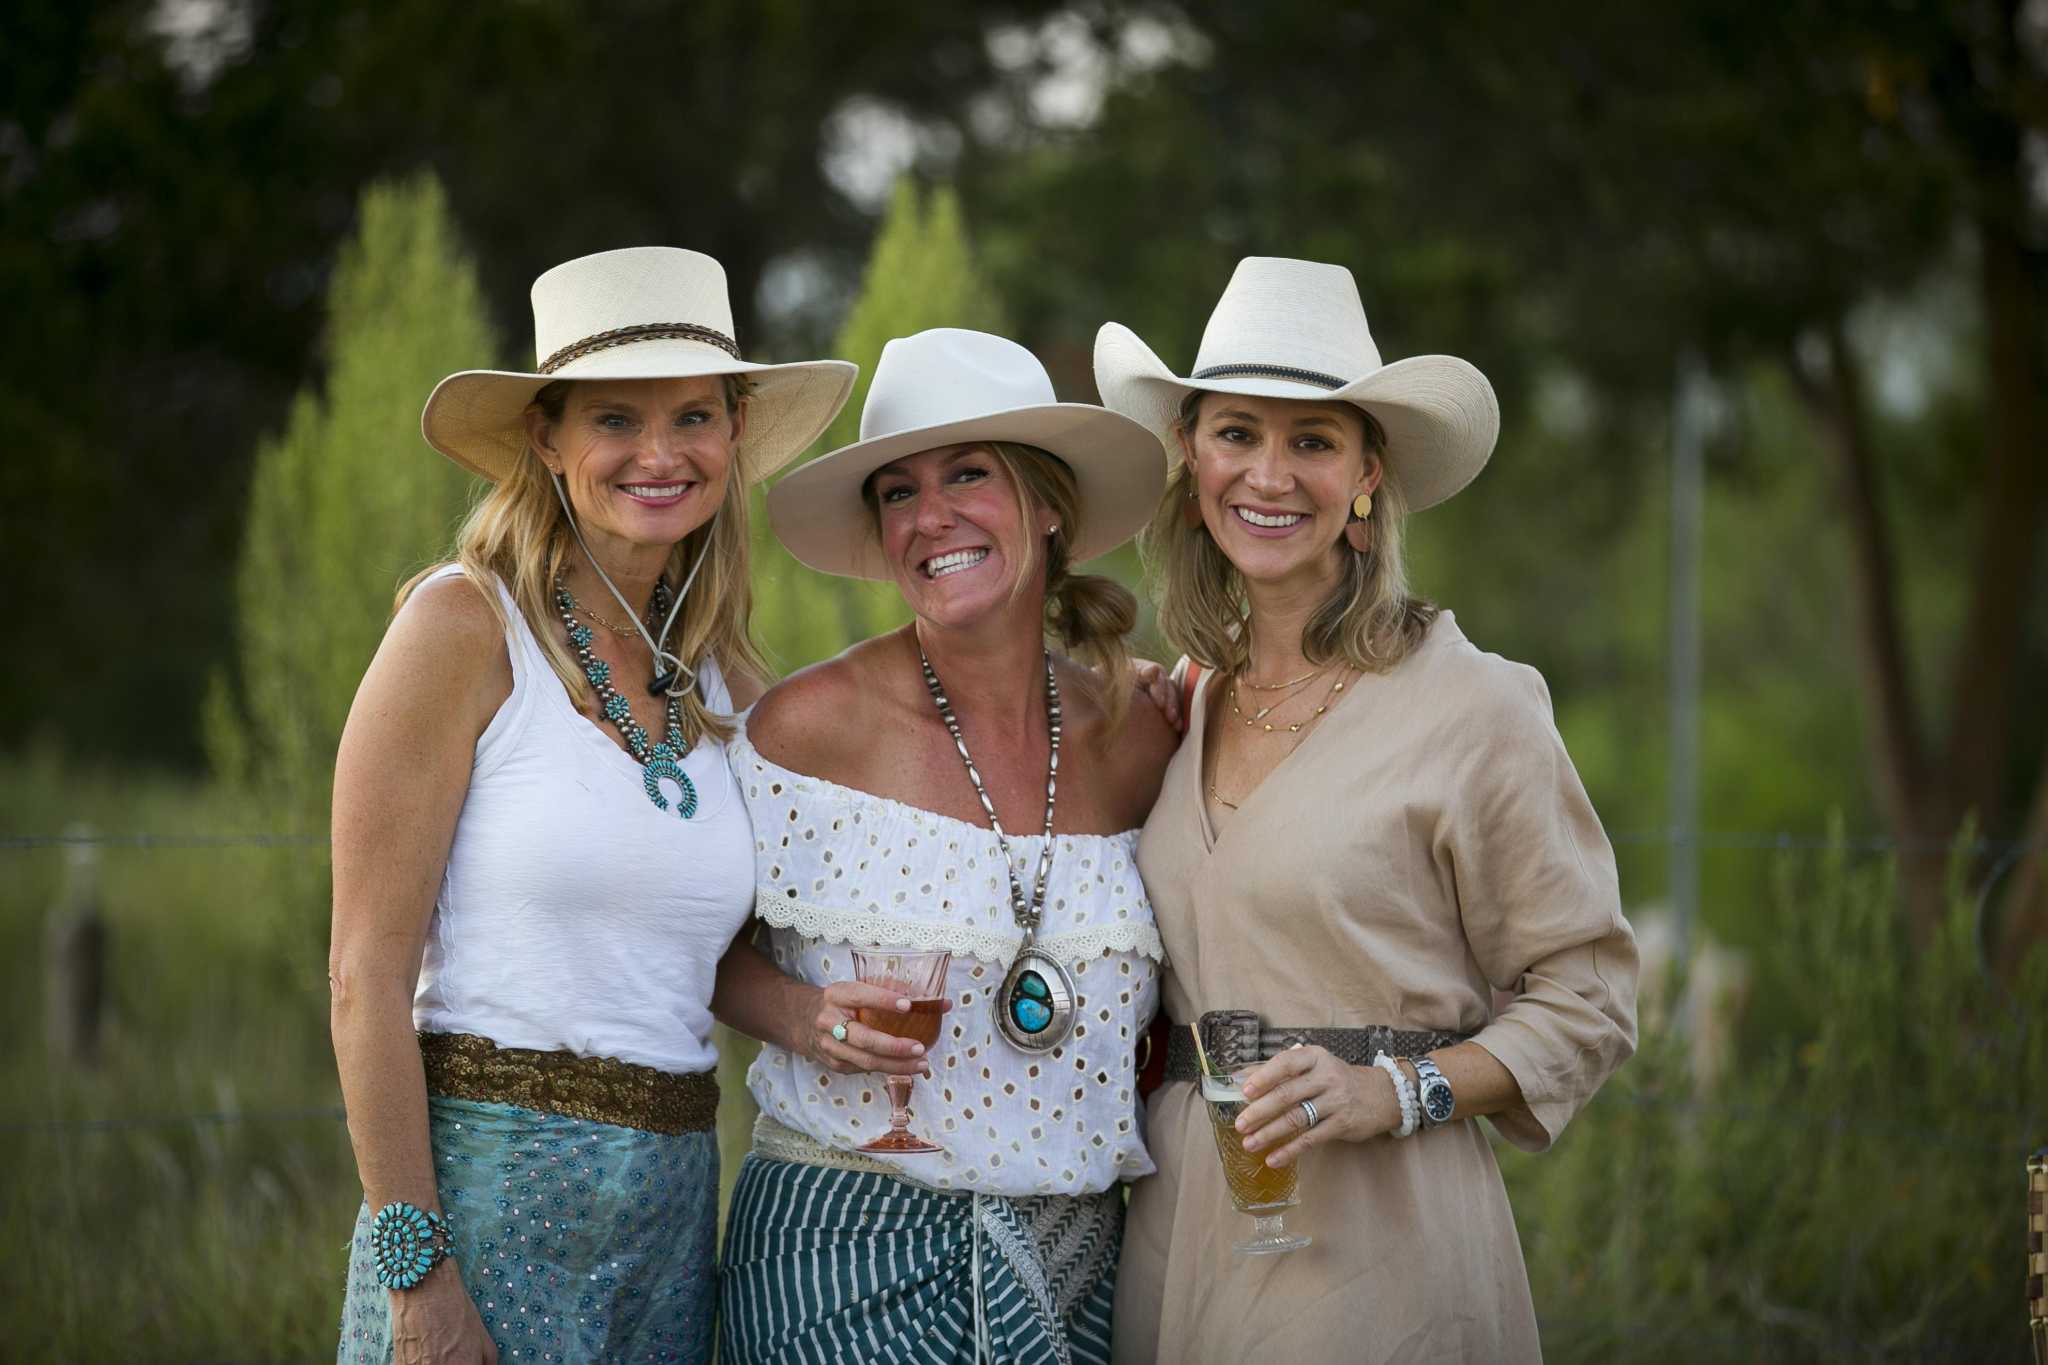 Farm Girls Supper Club hosts its first-ever Round Top dinner party at